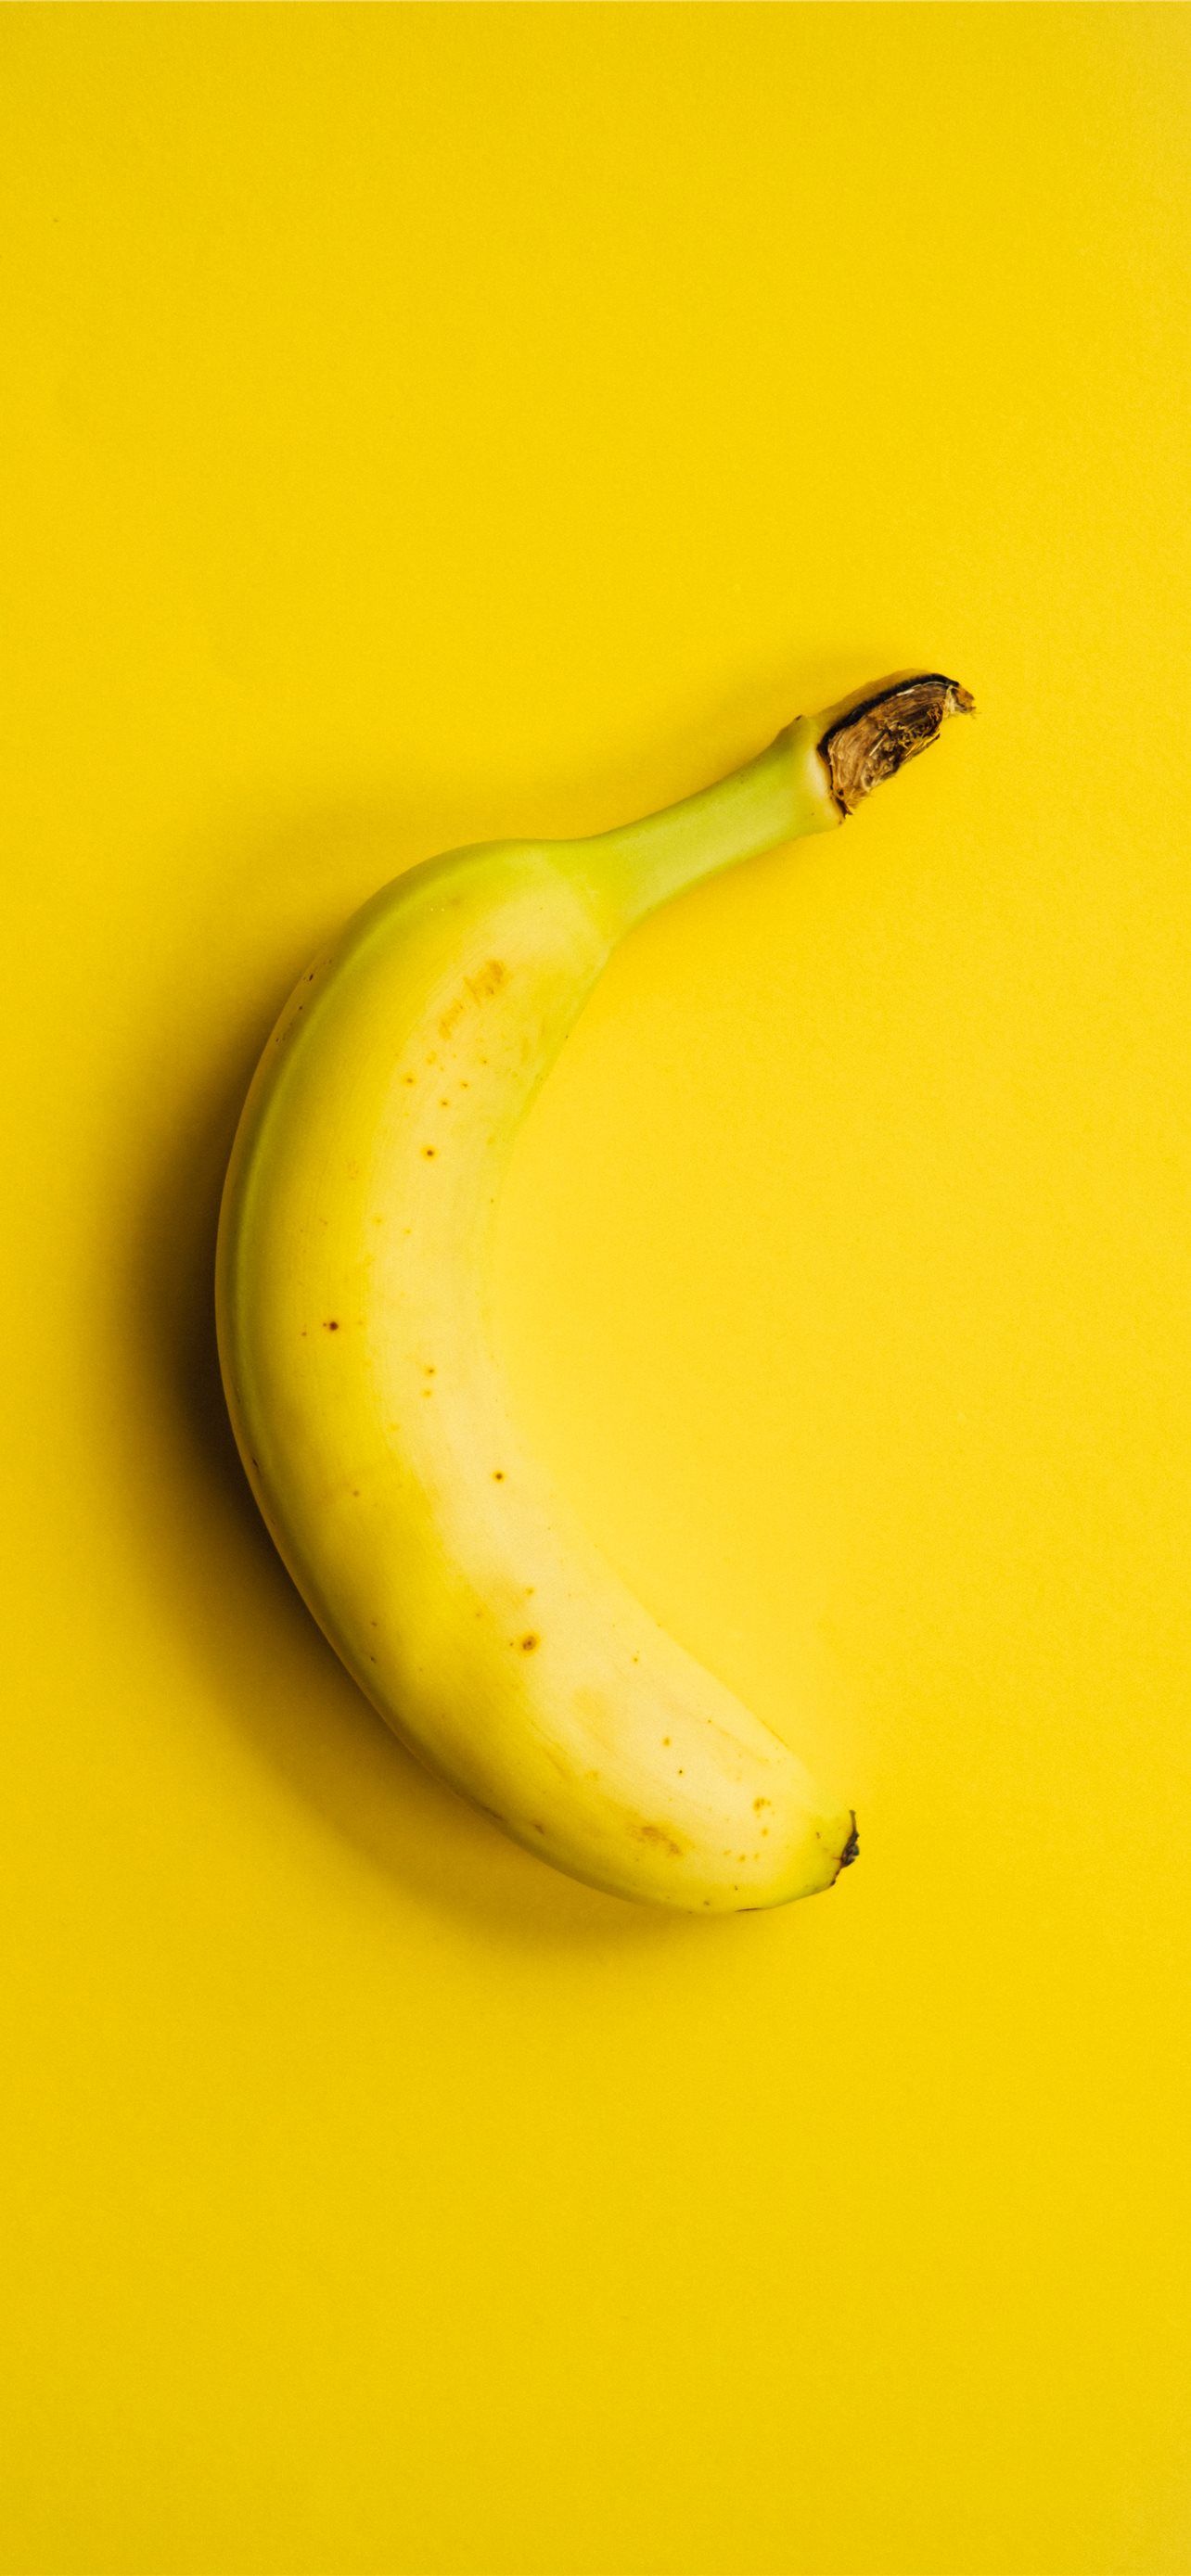 A banana is on top of yellow background - Yellow